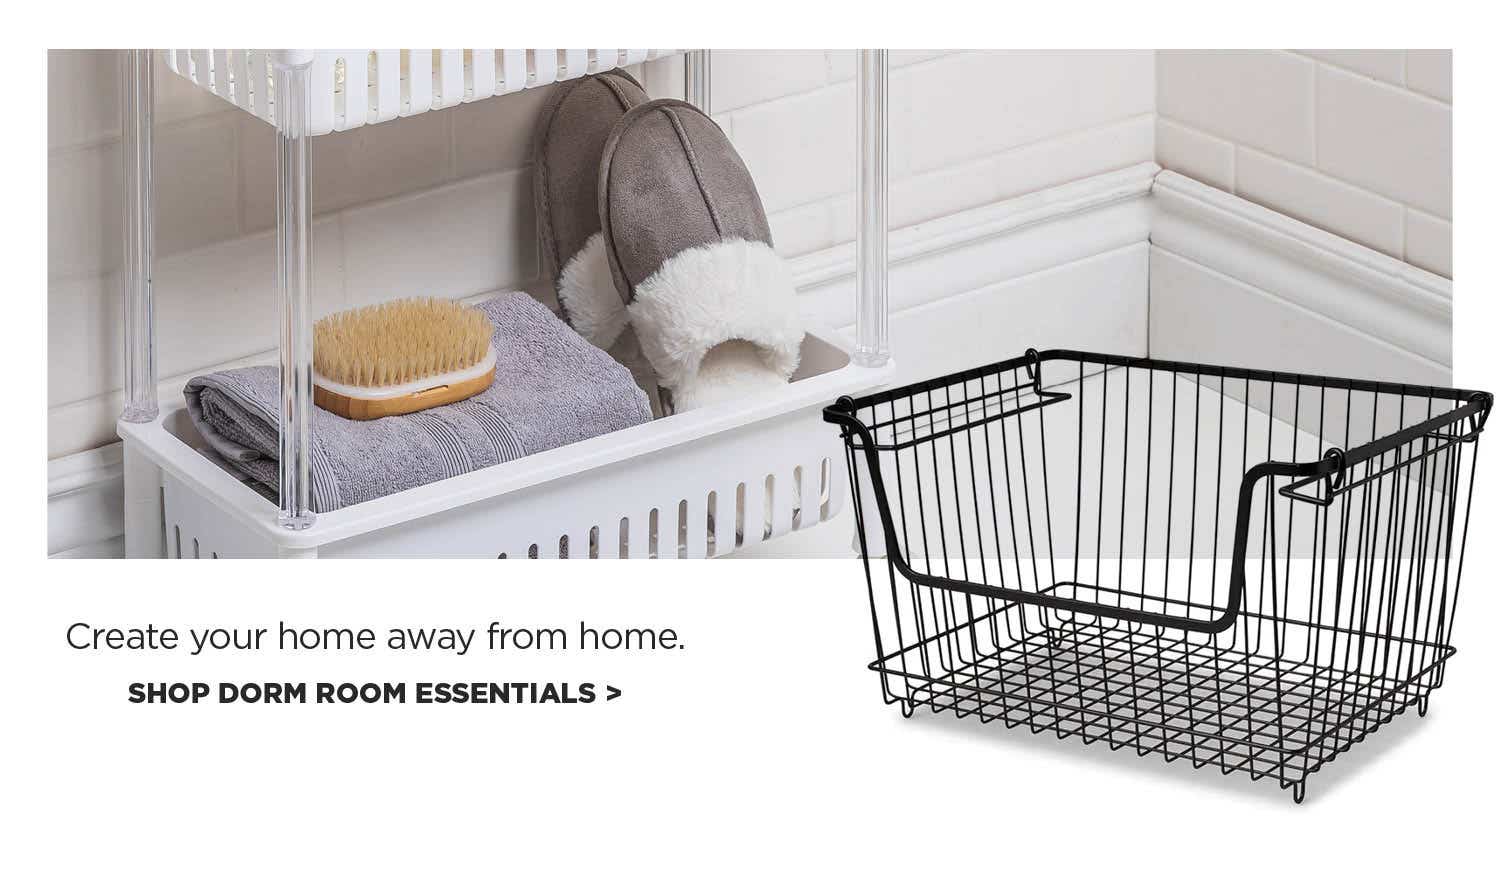 Create your home away from home – stacking basket and rollaway storage with towels and slippers